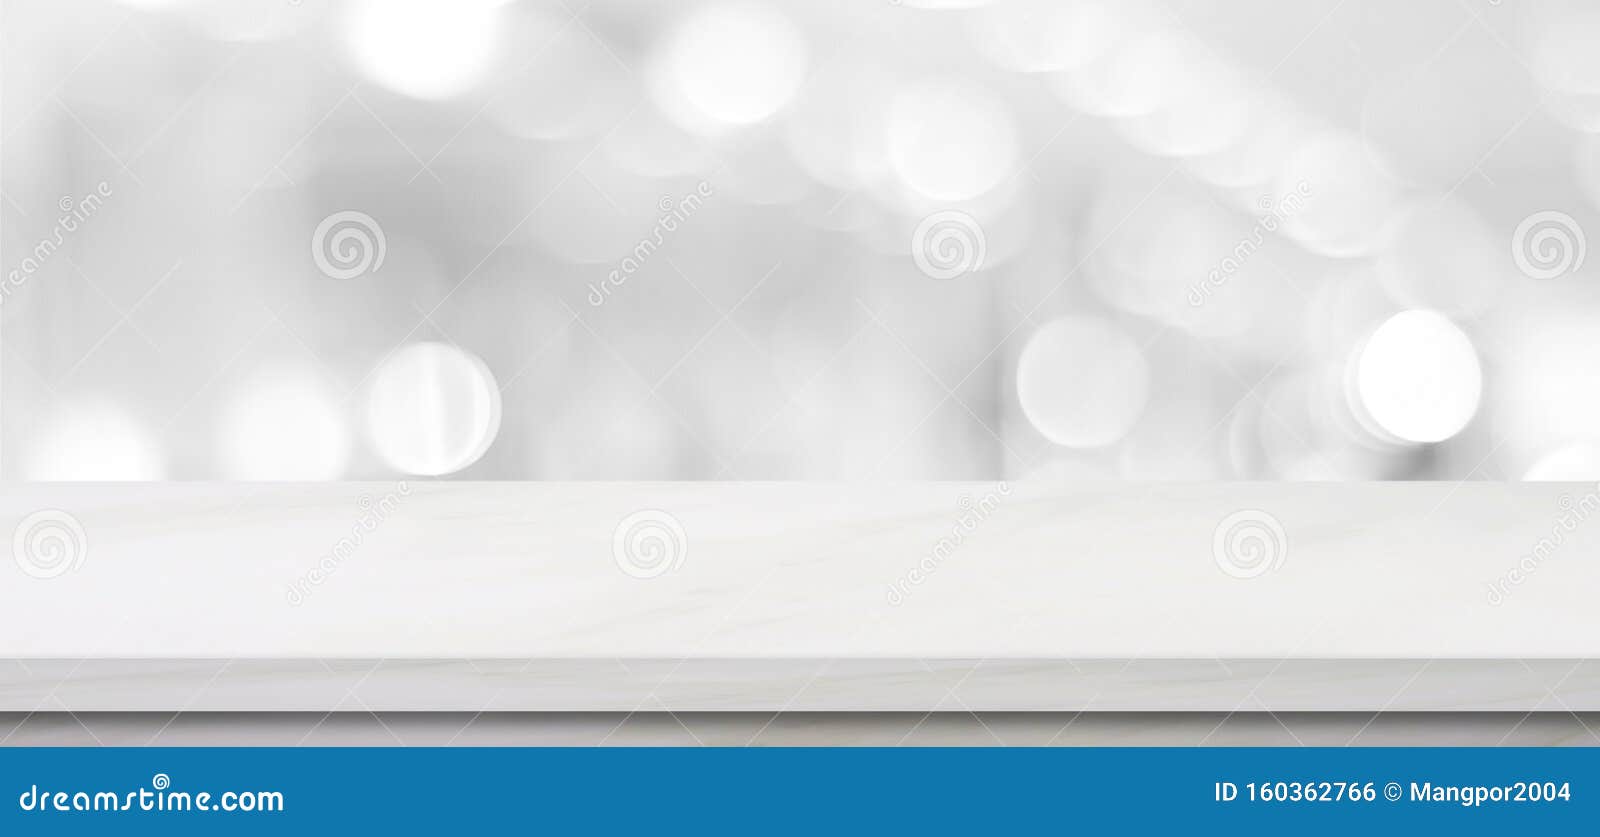 empty white table top, counter, desk background over blur perspective bokeh light background, white marble stone table, shelf and